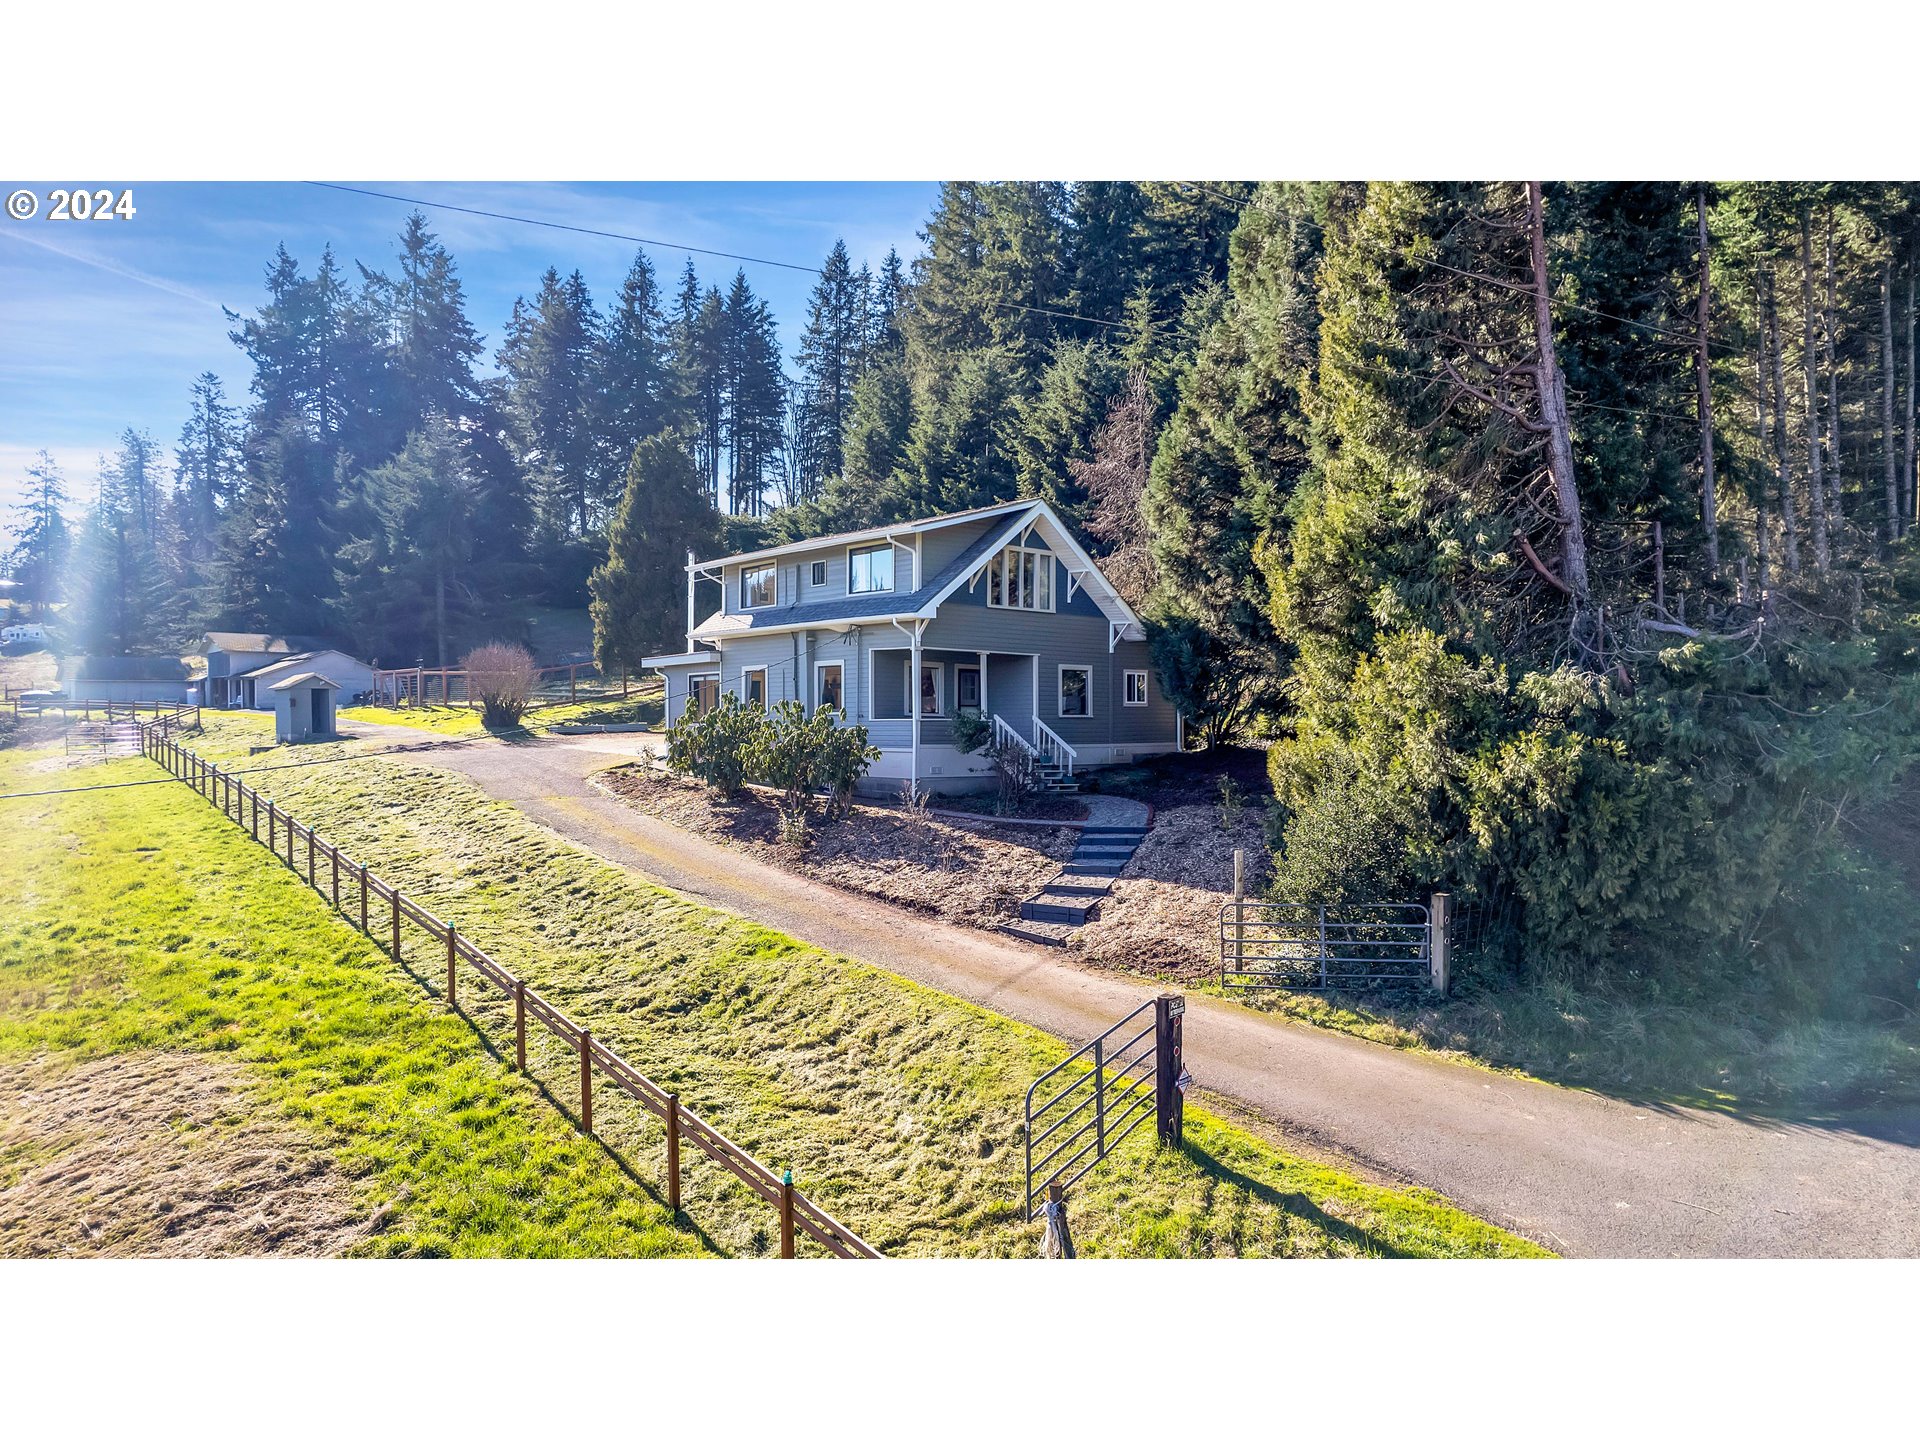 28888 WILLOW CREEK RD, Eugene, OR 